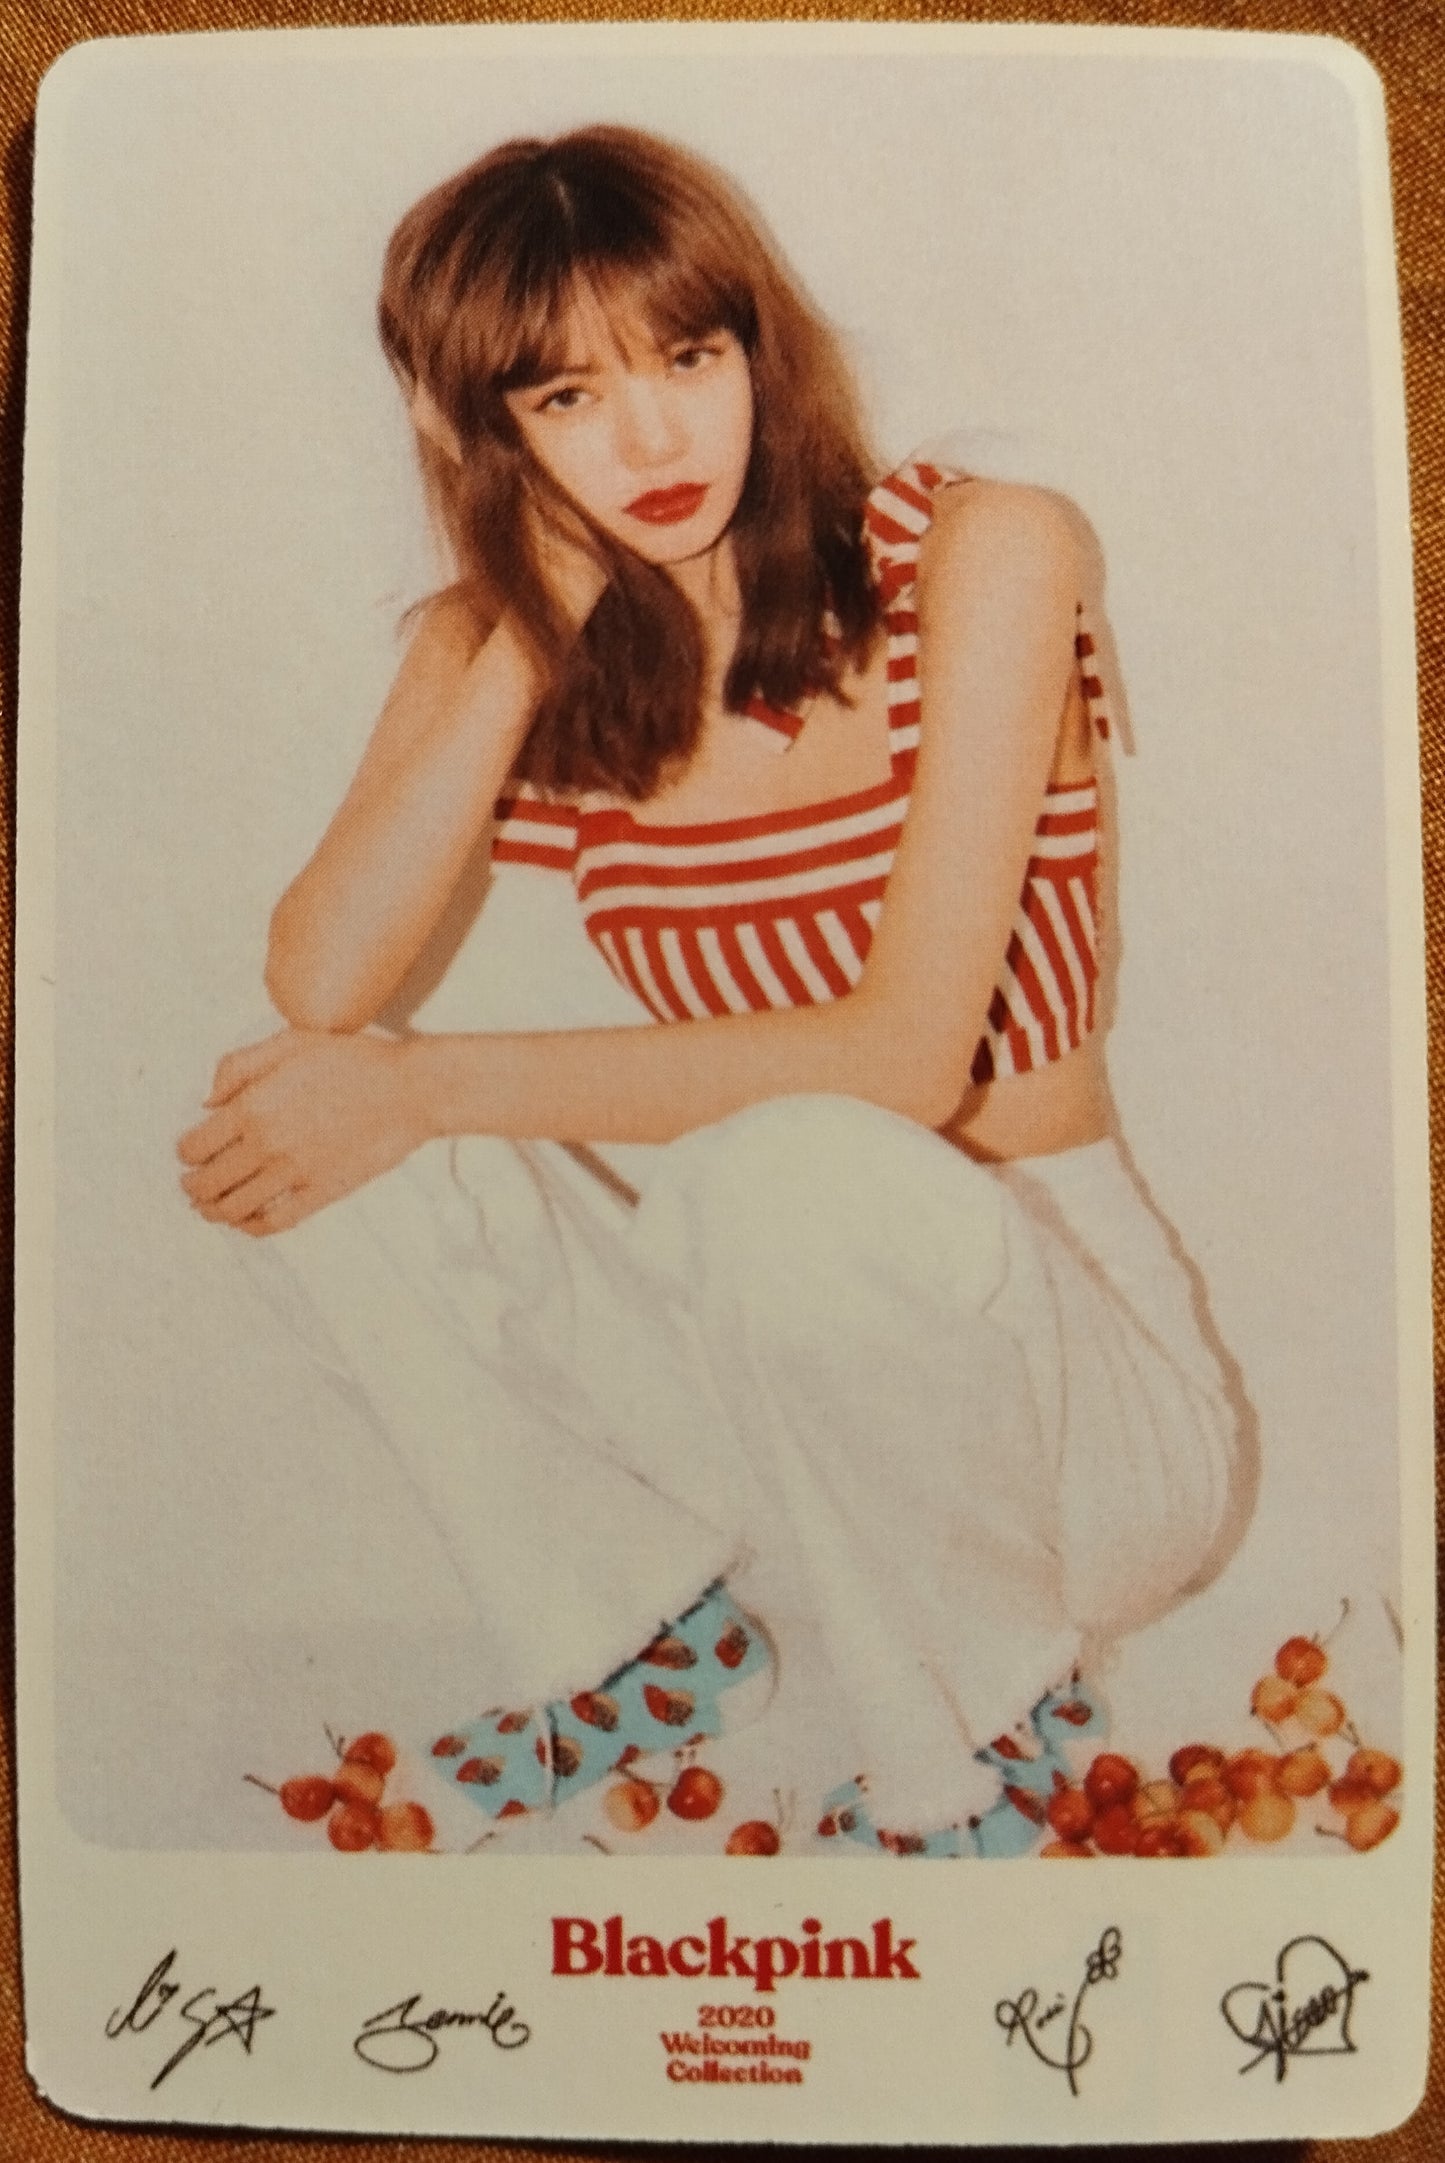 Photocard au choix BLACKPINK 2020 welcoming collection Lisa2